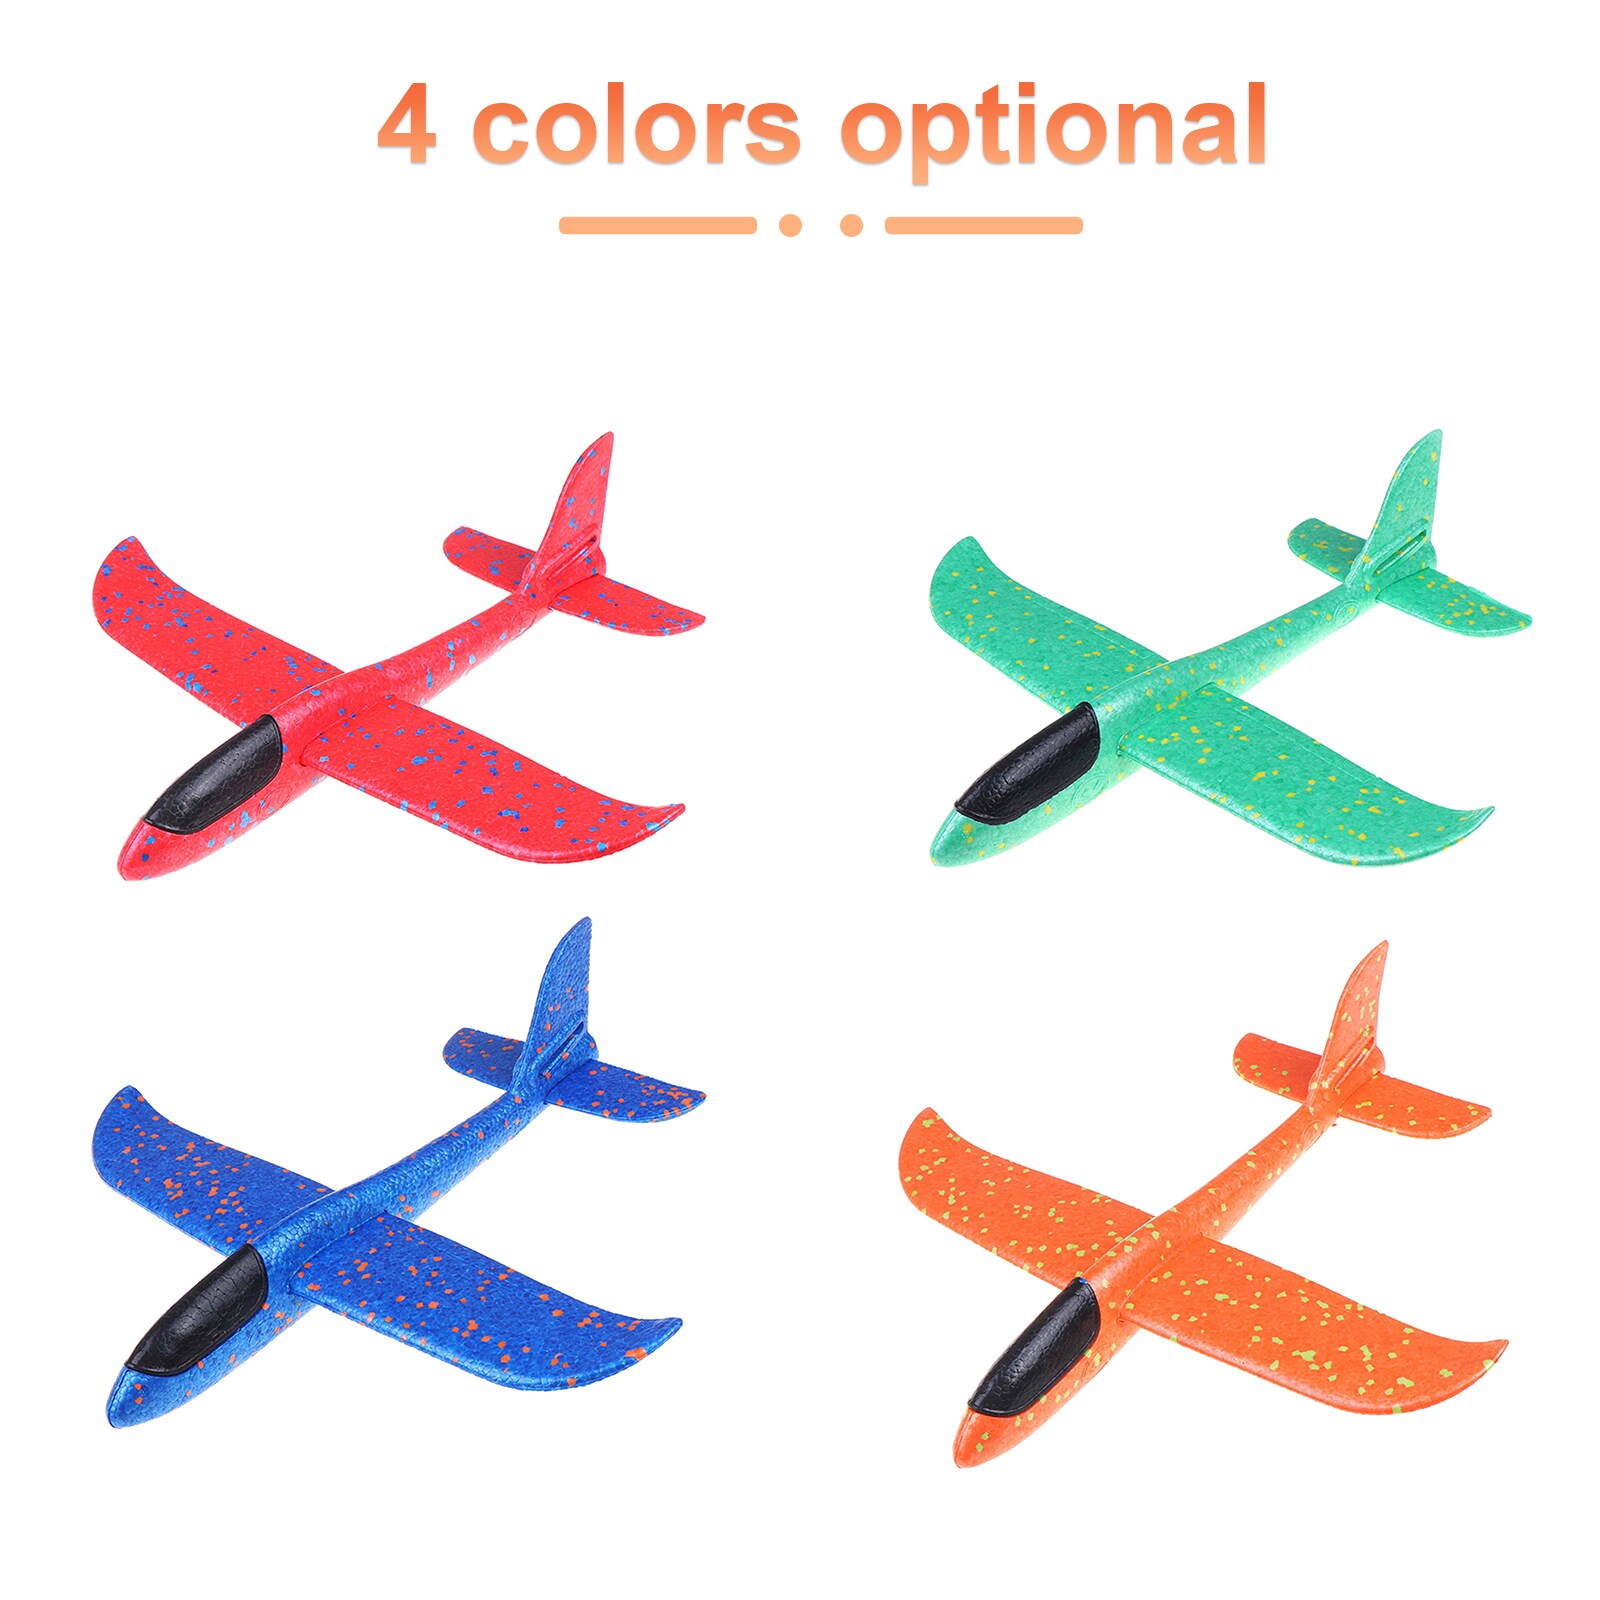 Flying Aircraft OPC Square Large Hand Throwing LED Foam Plane Multicolor Outdoor Sport Game Toys Dual Flight Mode Aeroplane Gliders Pack of 1 Birthday Party Gifts Gifts for Kids